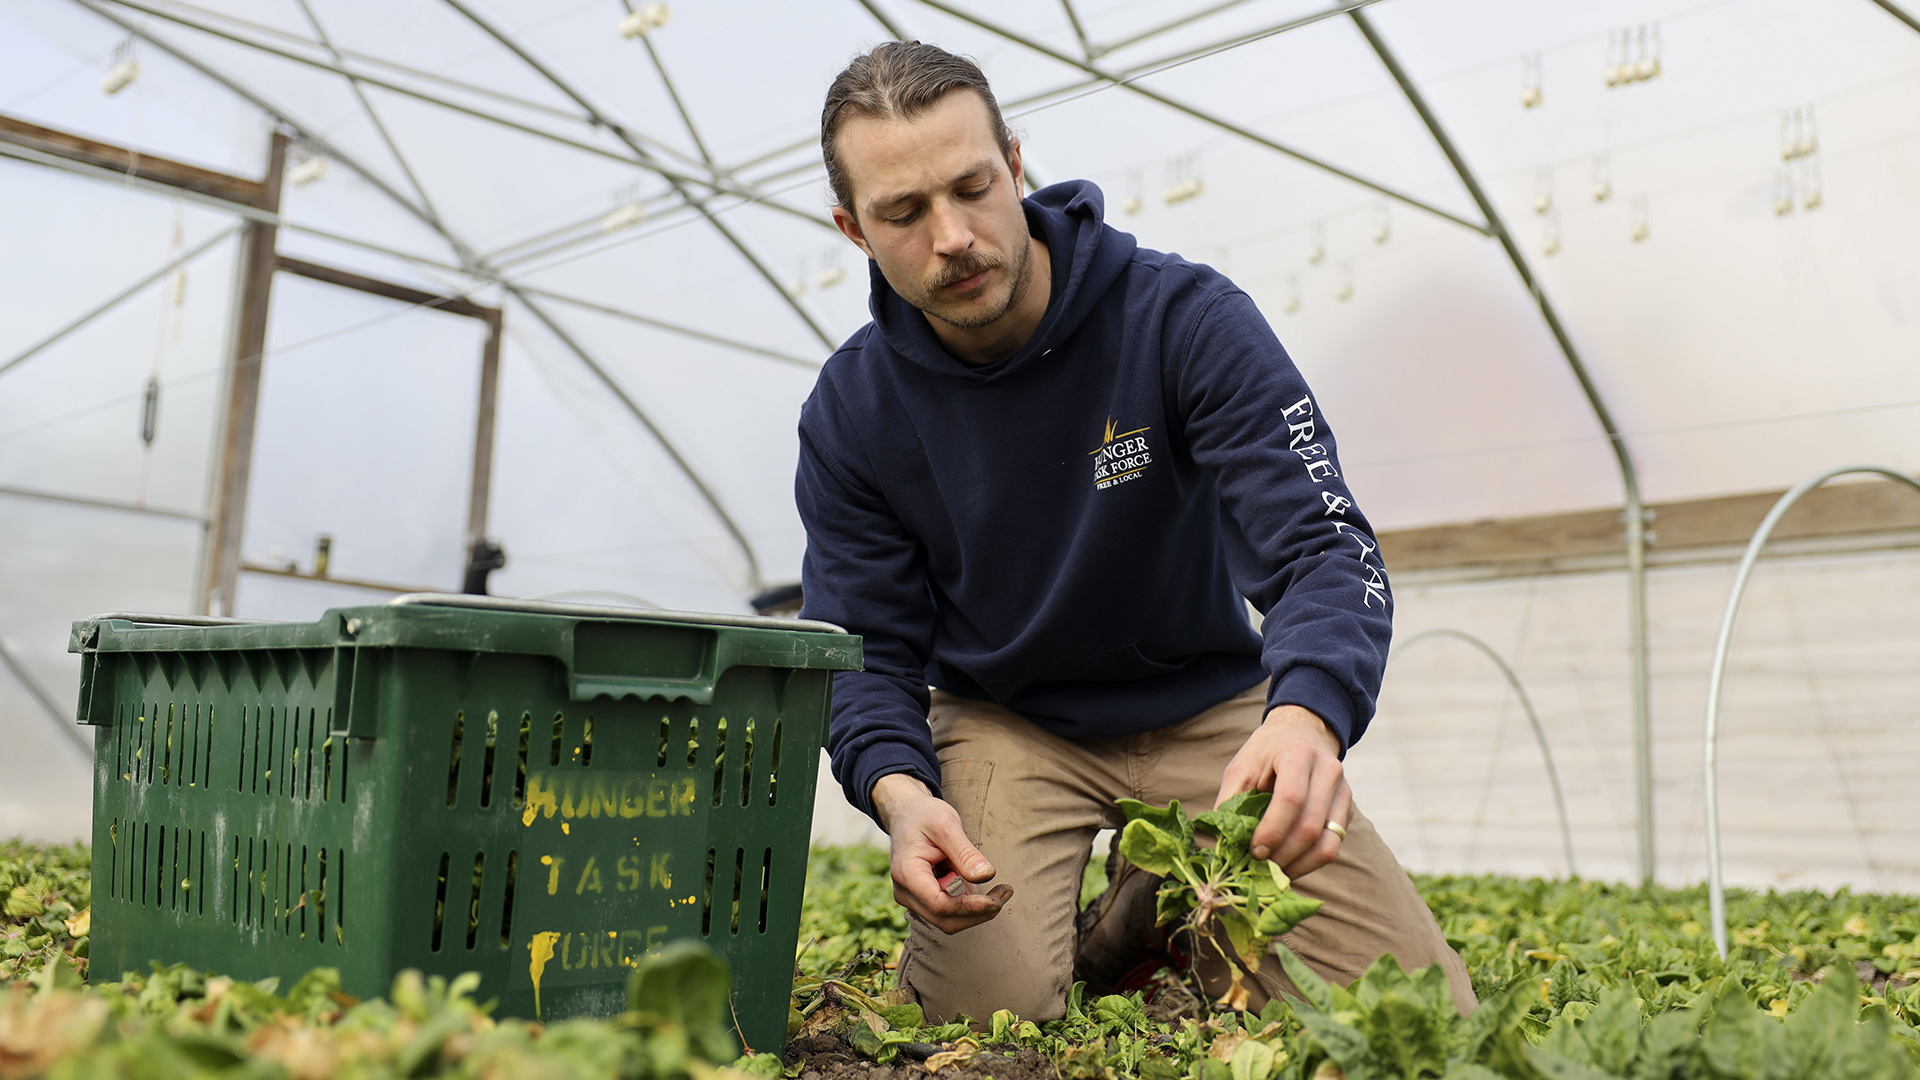 Jordan Leitner kneels inside a hoop house and pulls spinach from the ground with a plastic crate located next to him.